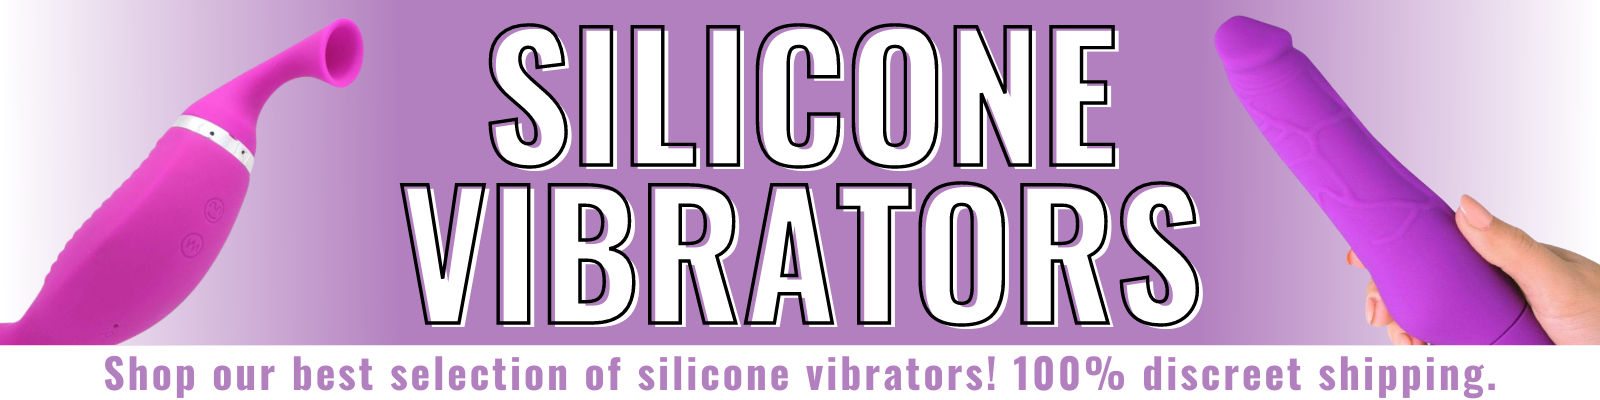 Banner for our silicone vibrators. Banner reads: Shop our best silicone vibrators! 100% discreet shipping.